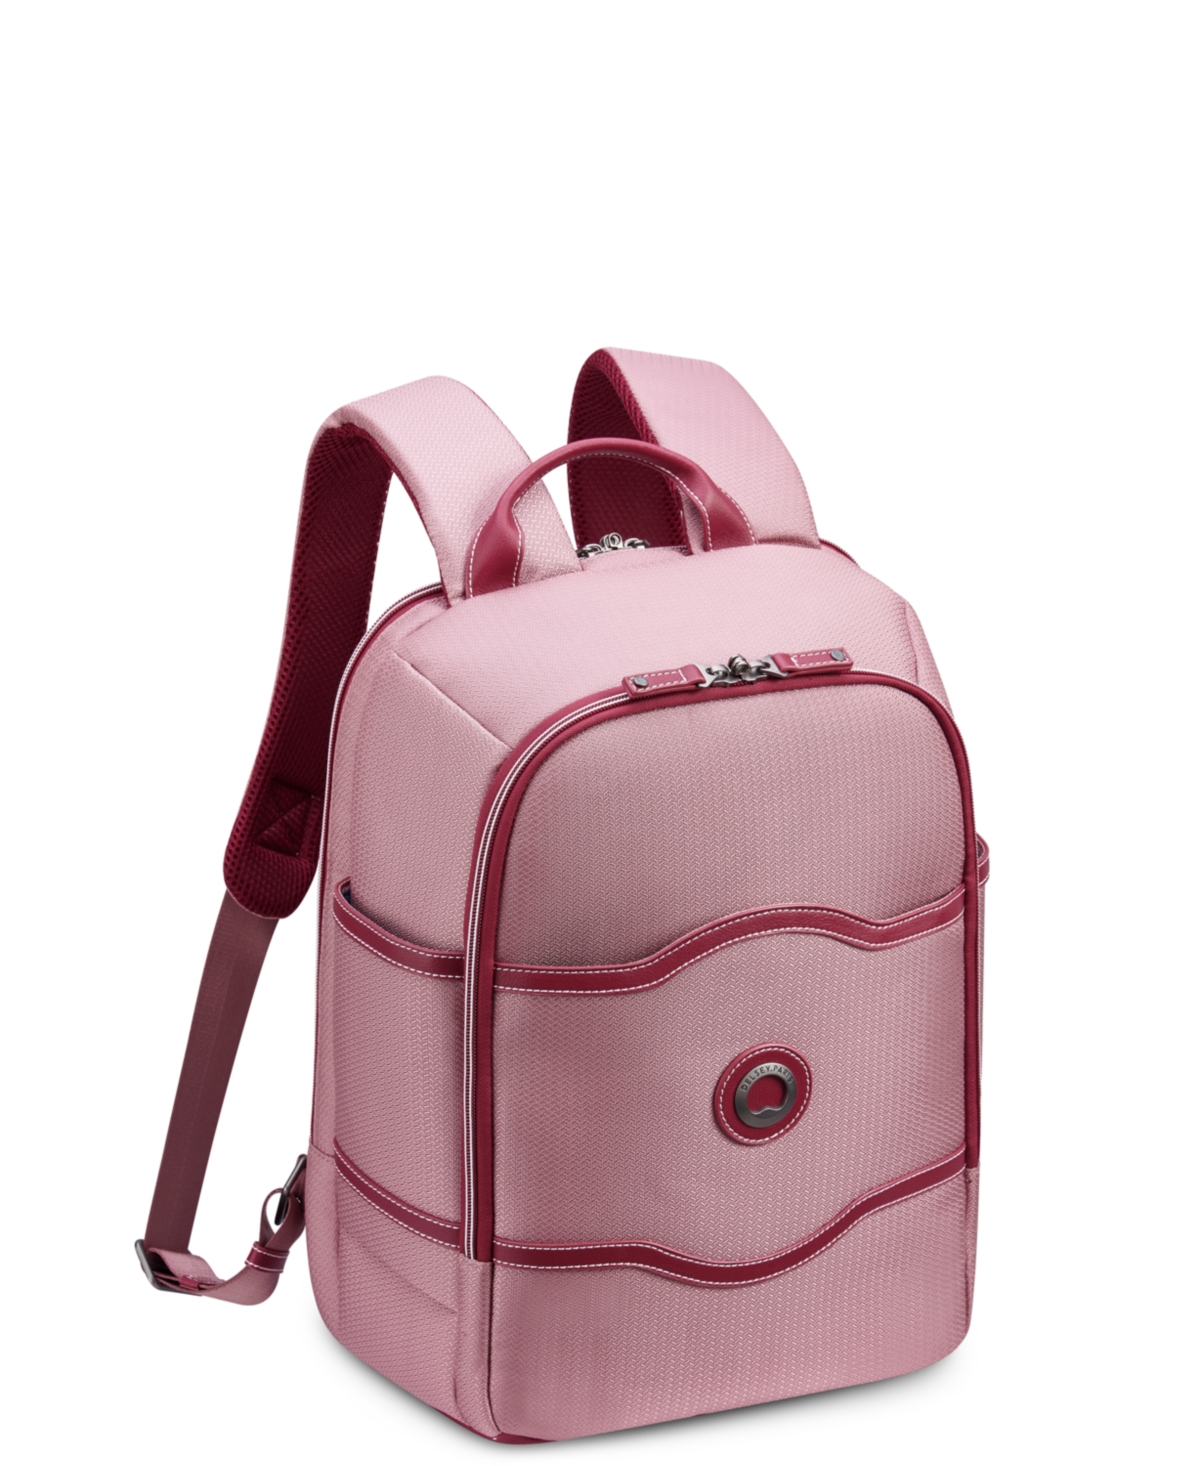 Chatelet Air 2.0 Backpack - Pink